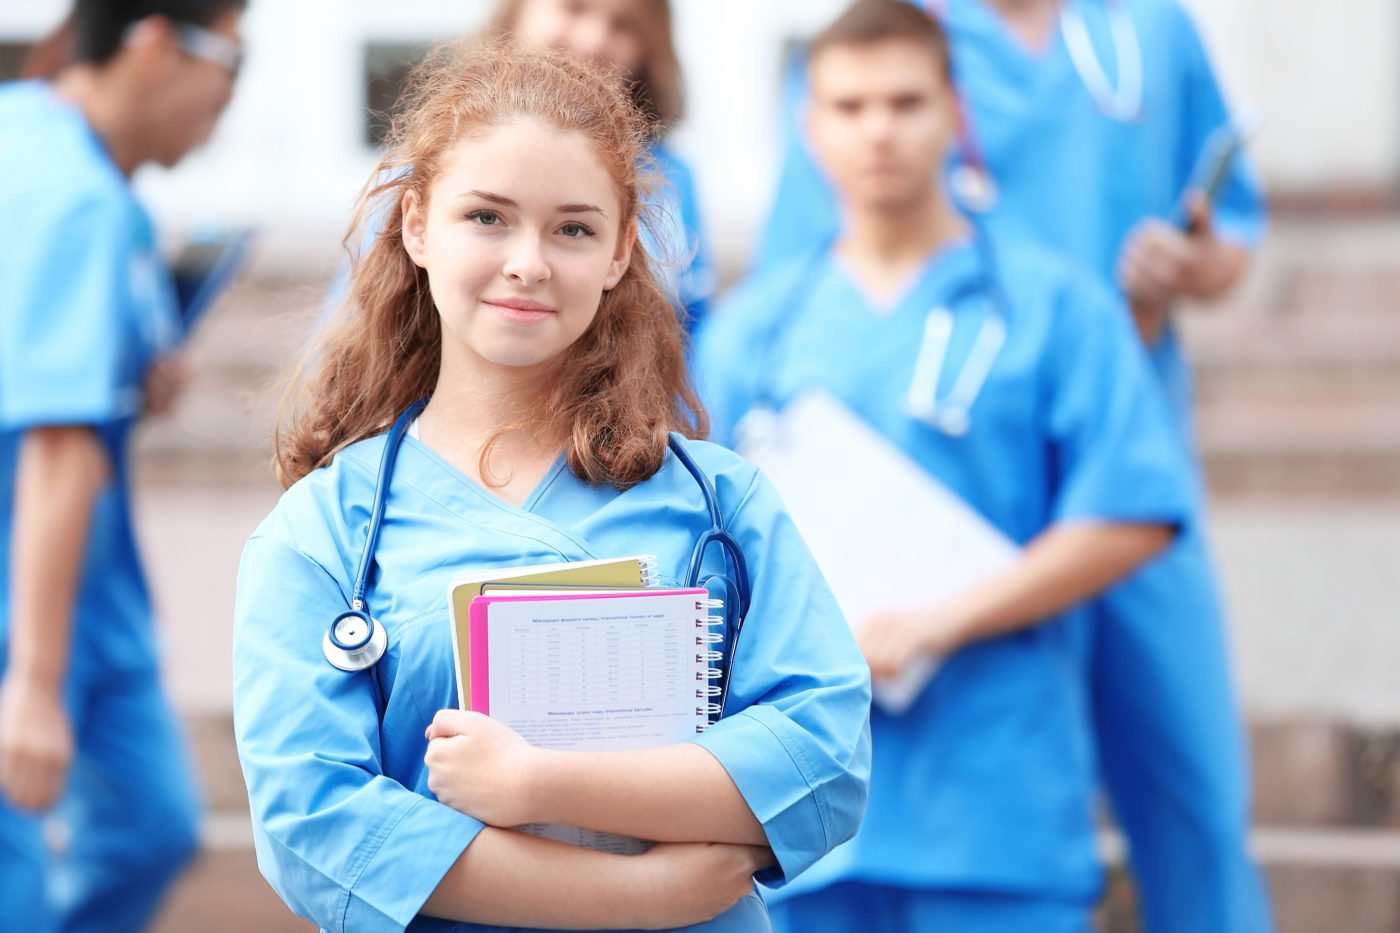 7 Things Medical Students Need To Know About Malpractice Insurance